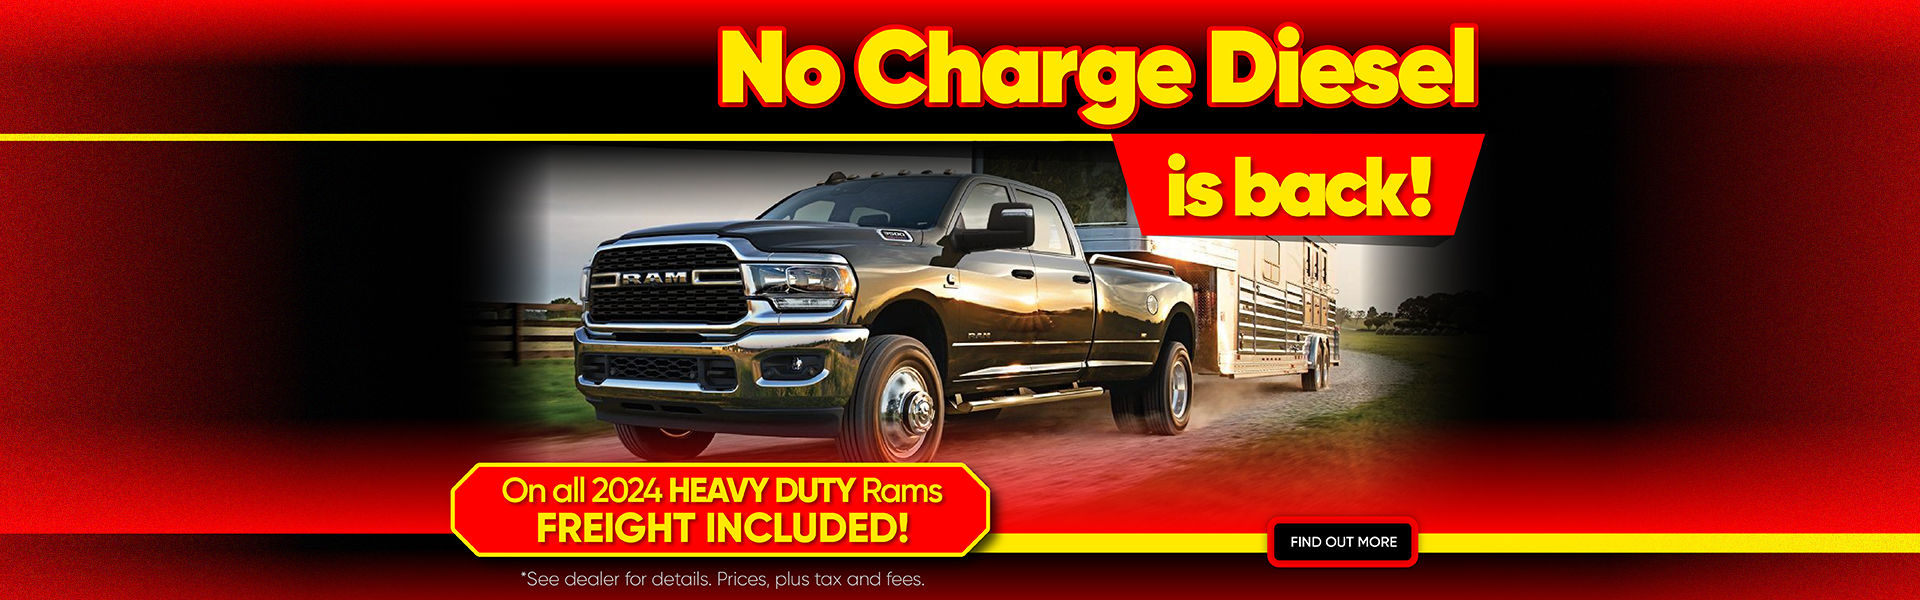 No Charge Diesel is back